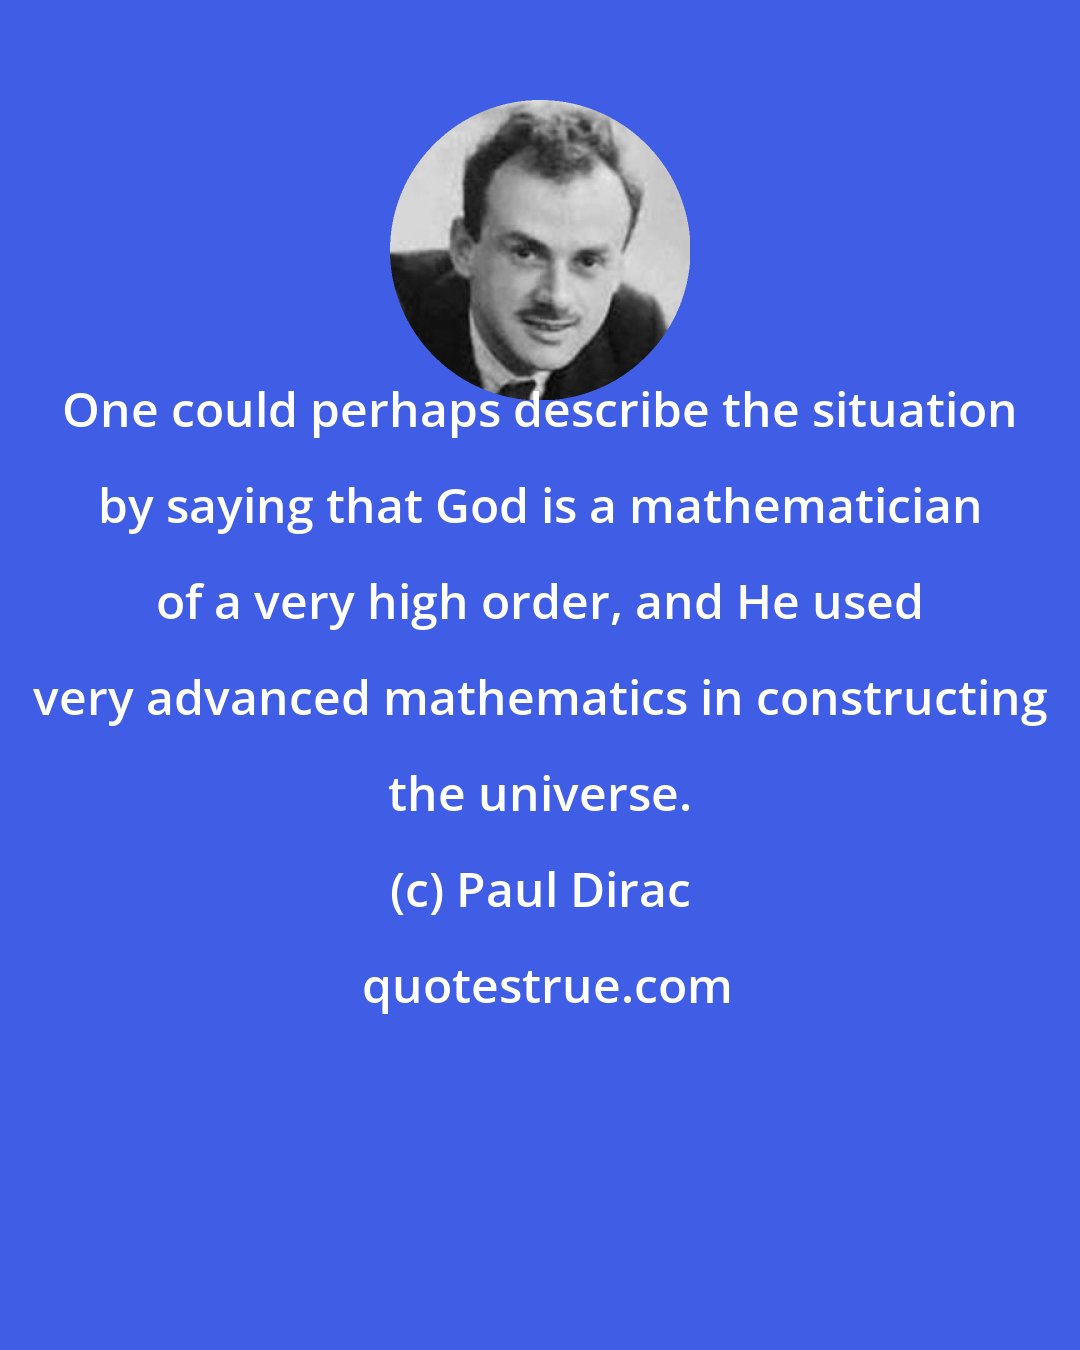 Paul Dirac: One could perhaps describe the situation by saying that God is a mathematician of a very high order, and He used very advanced mathematics in constructing the universe.